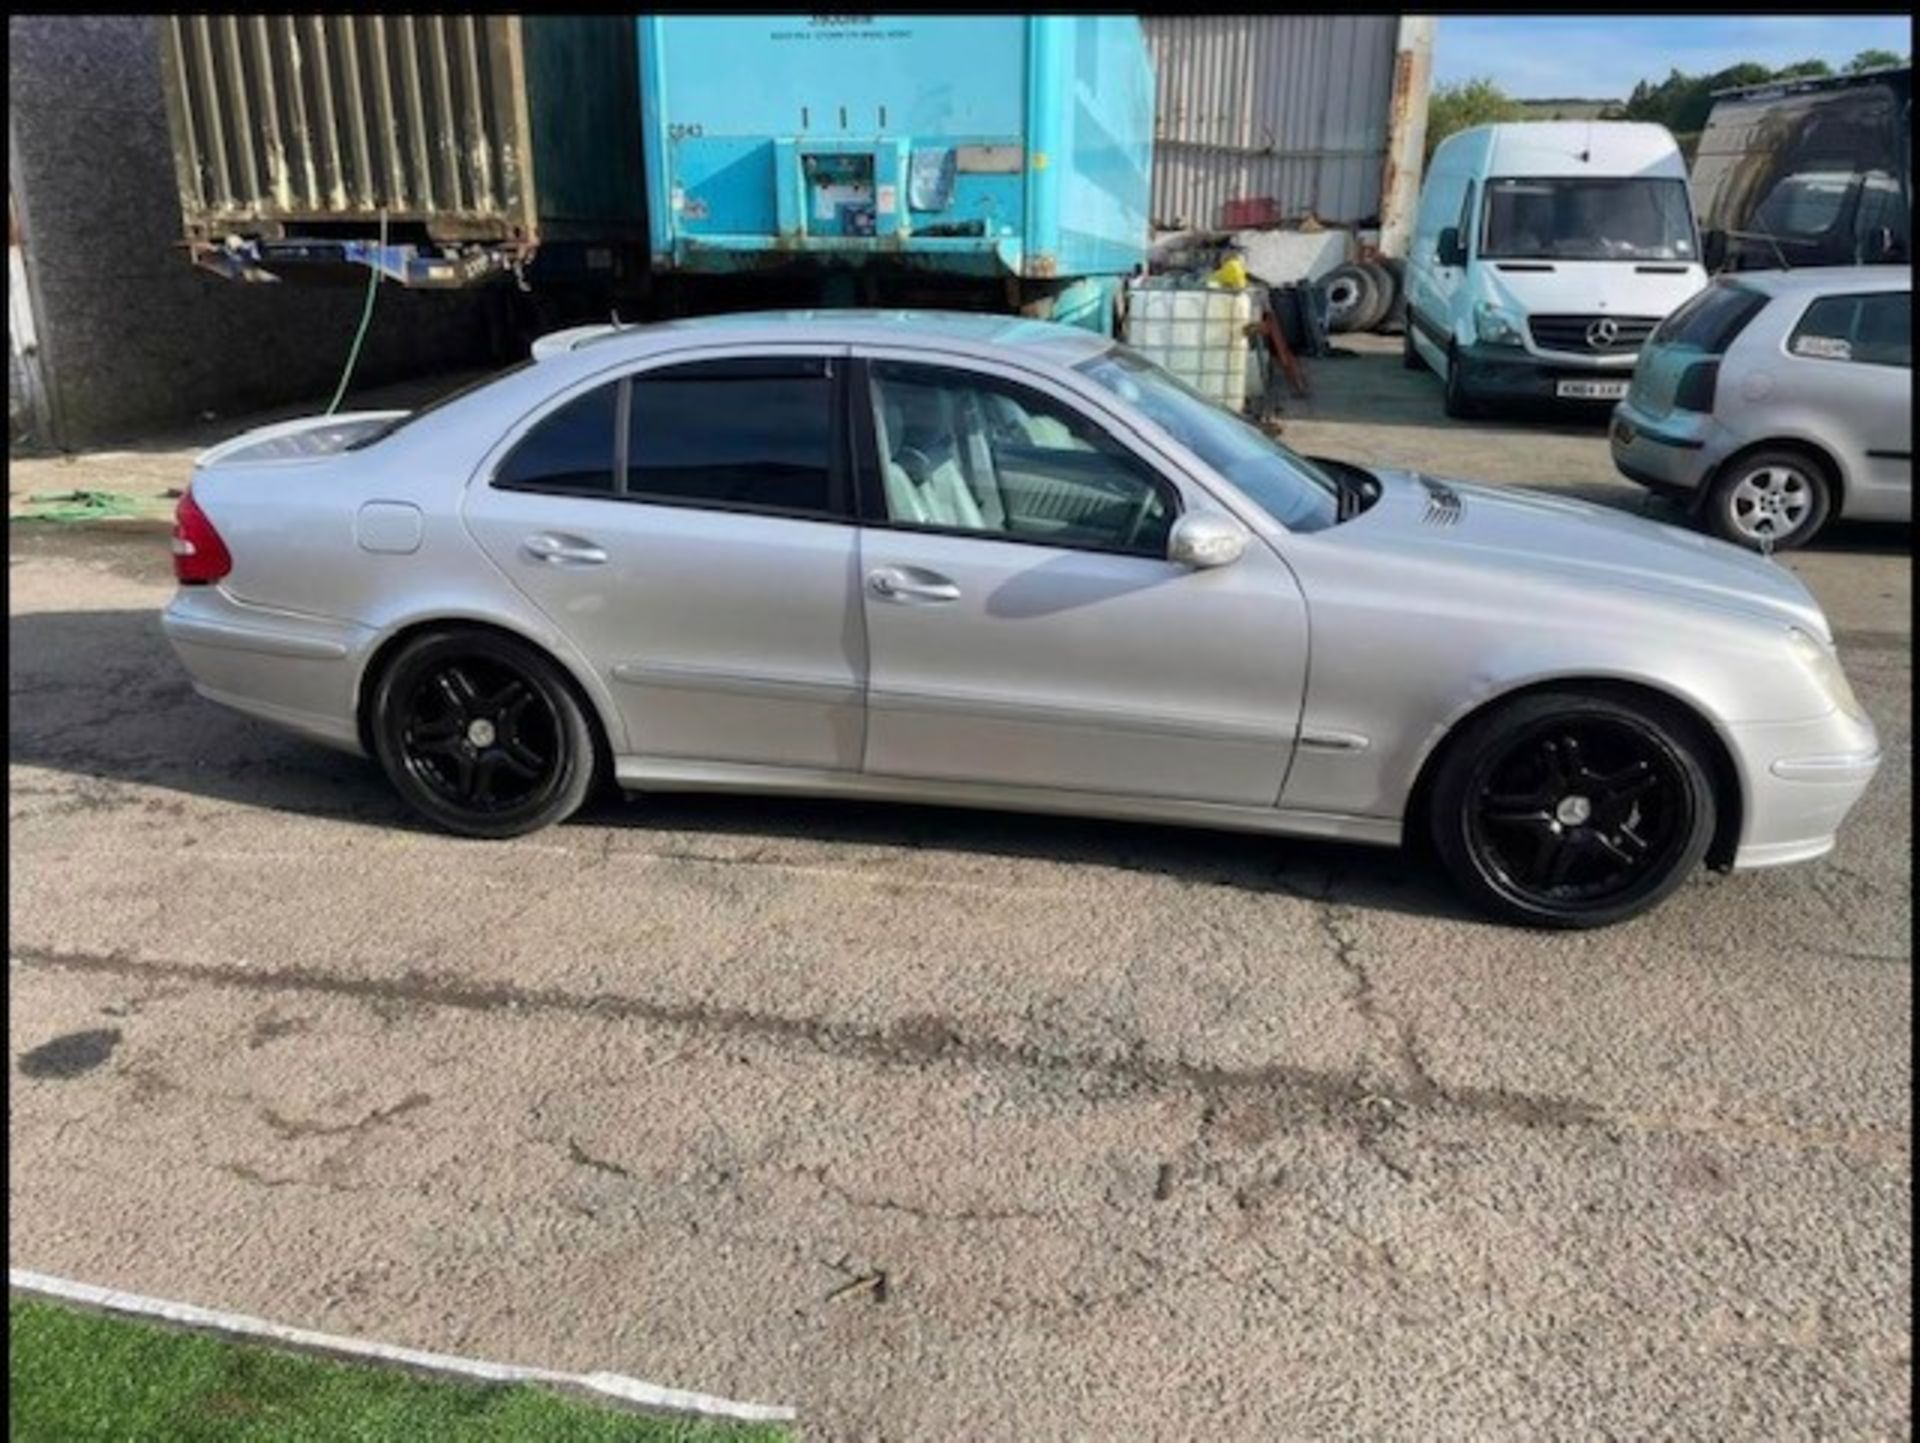 Mercedes E320 CDI 103k genuine miles ,as per pictures has scratches as shown in photos but is all in